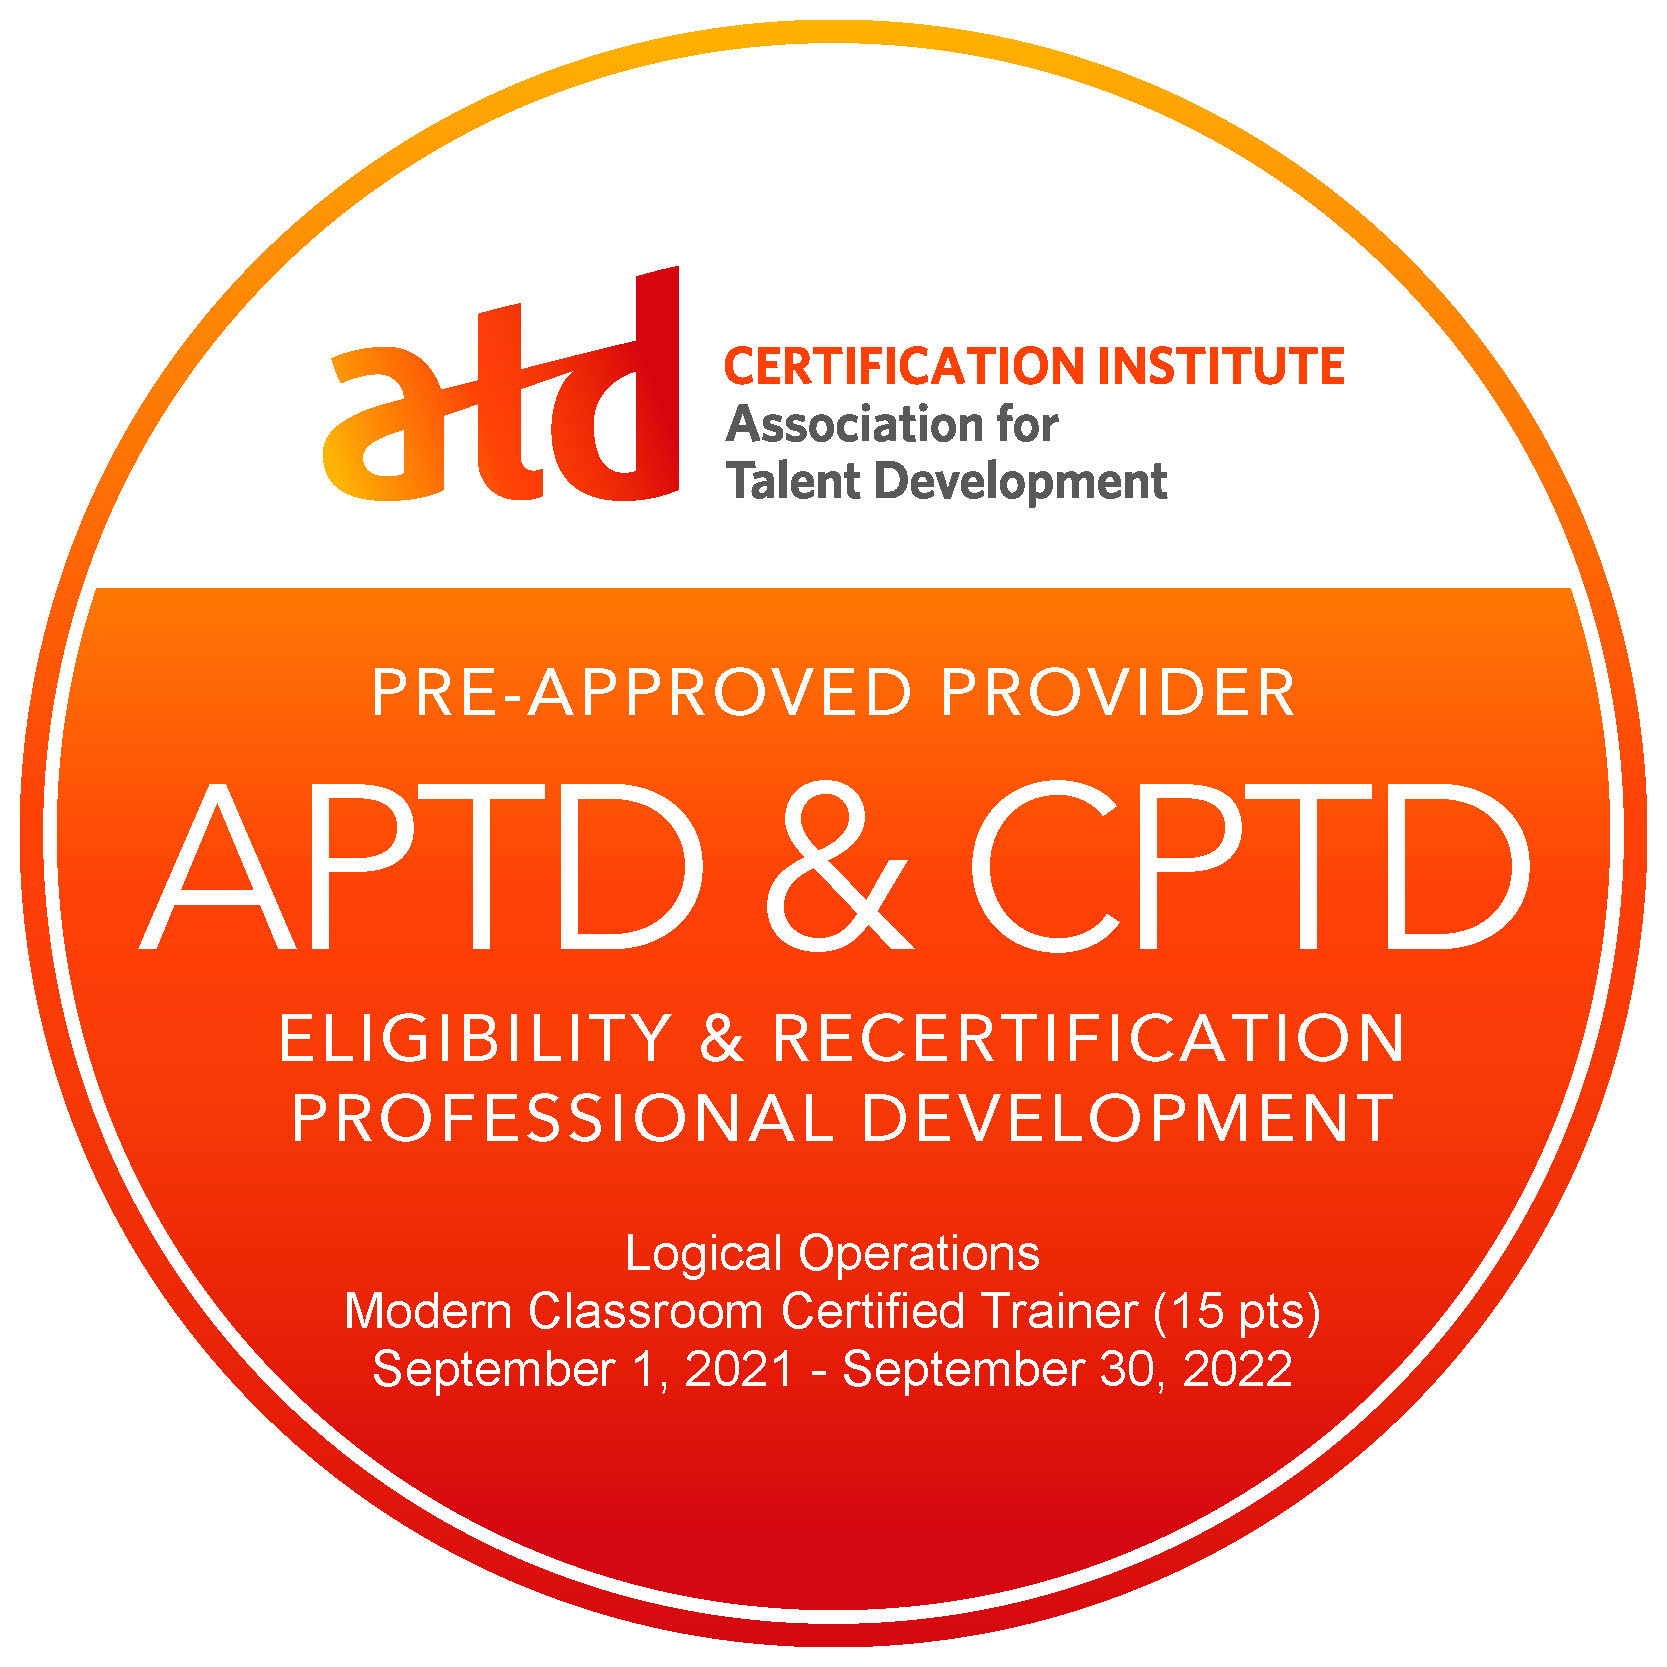 ATD Certification Institute Recertification Seal for MCCT